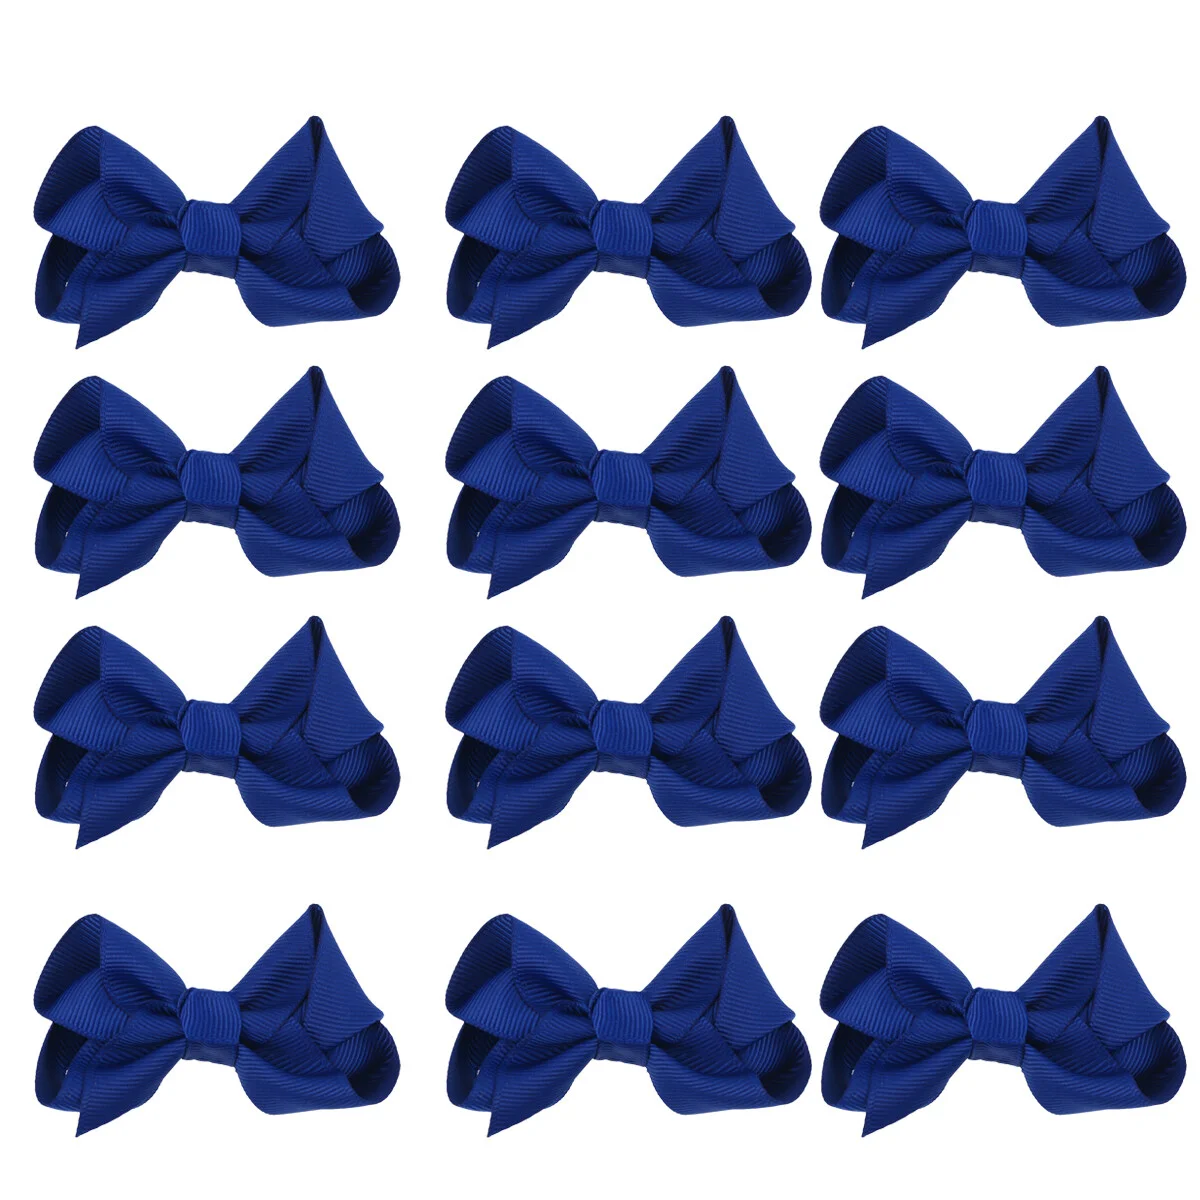 

12pcs Girls Small Hair Bows Grosgrain Ribbon Boutique Bows Clip Bow Tie Lovely Colorful Barrettes Hairpins Hair Accessories for